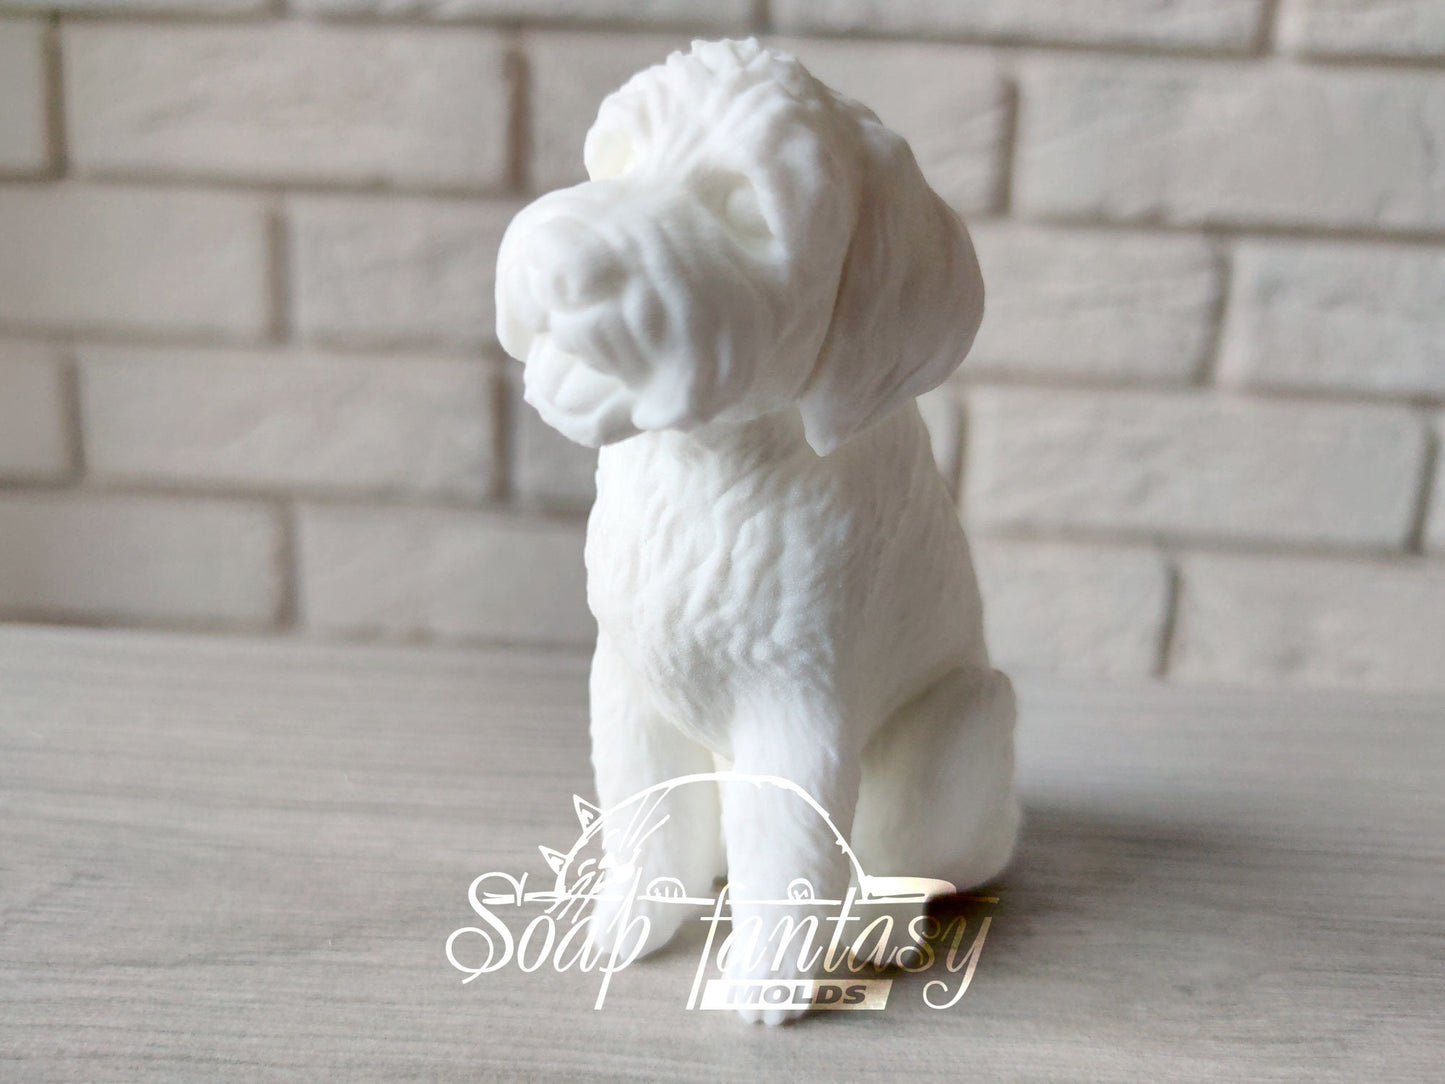 Shaggy dog silicone mold for soap making